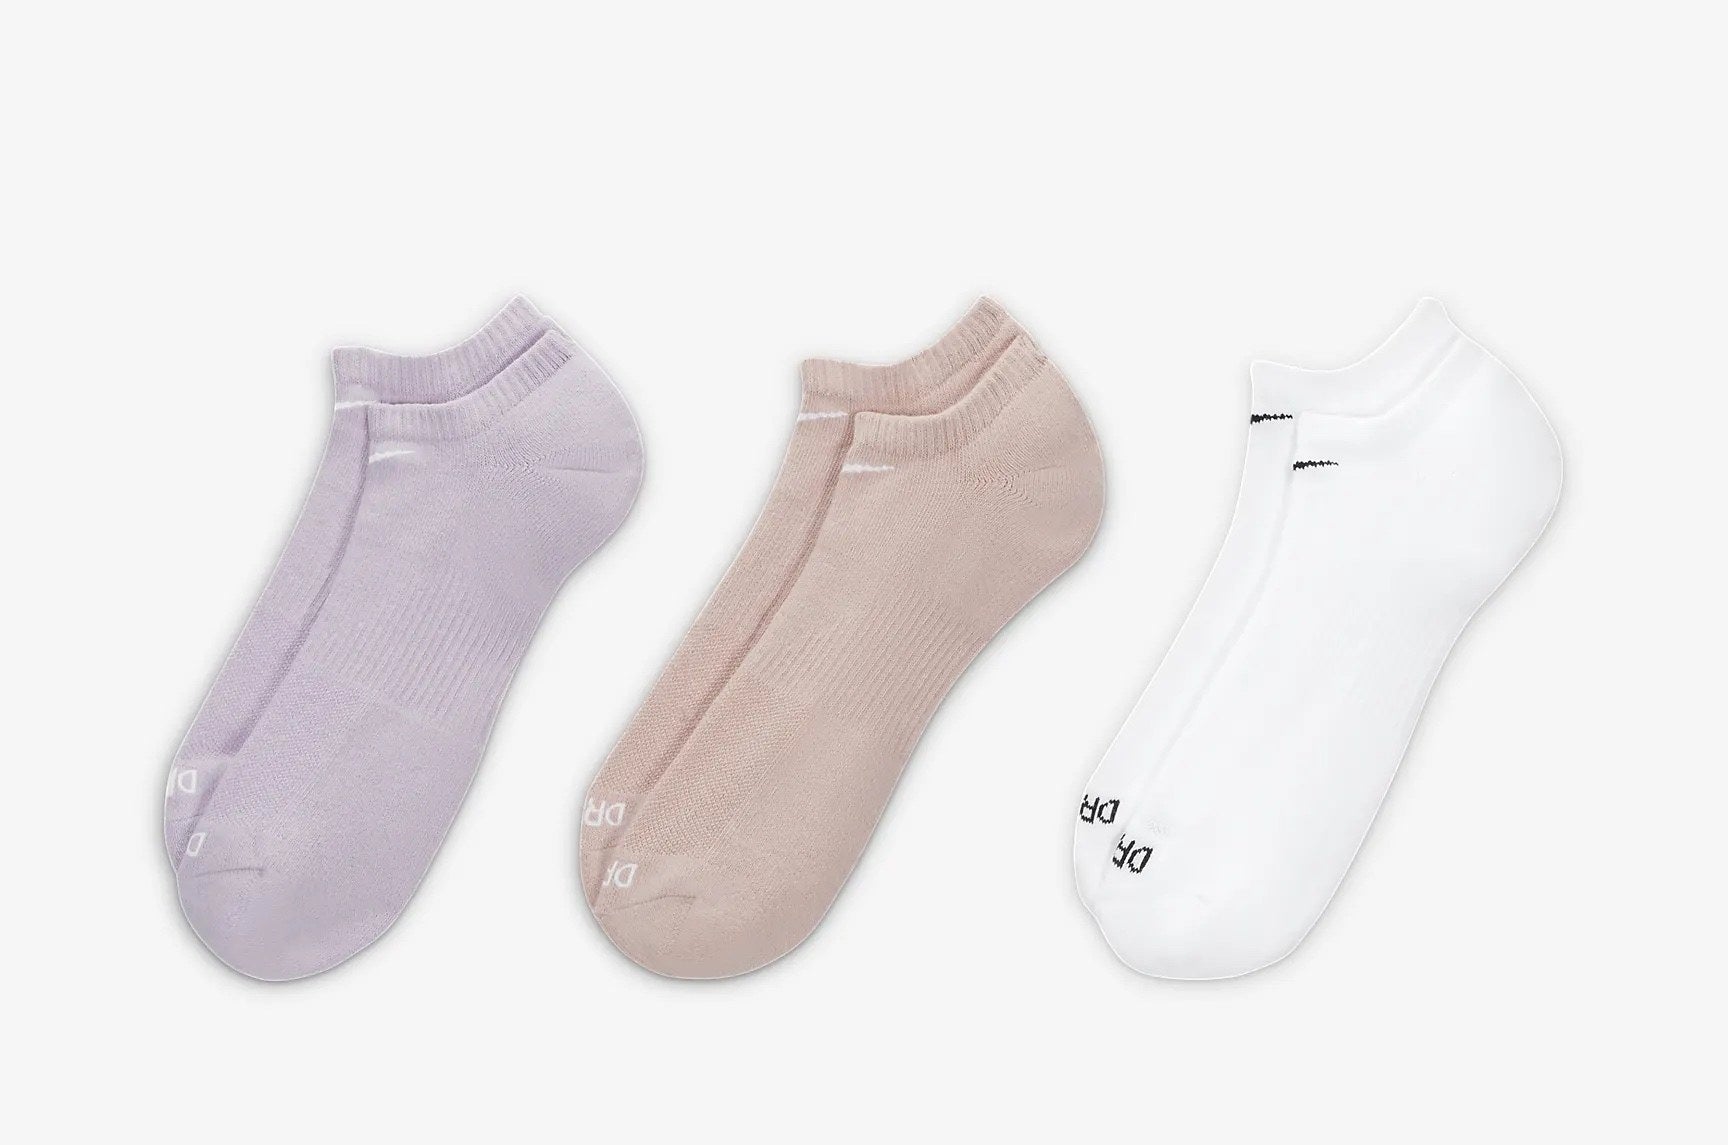 Three pairs of the socks in purple, tan, and white